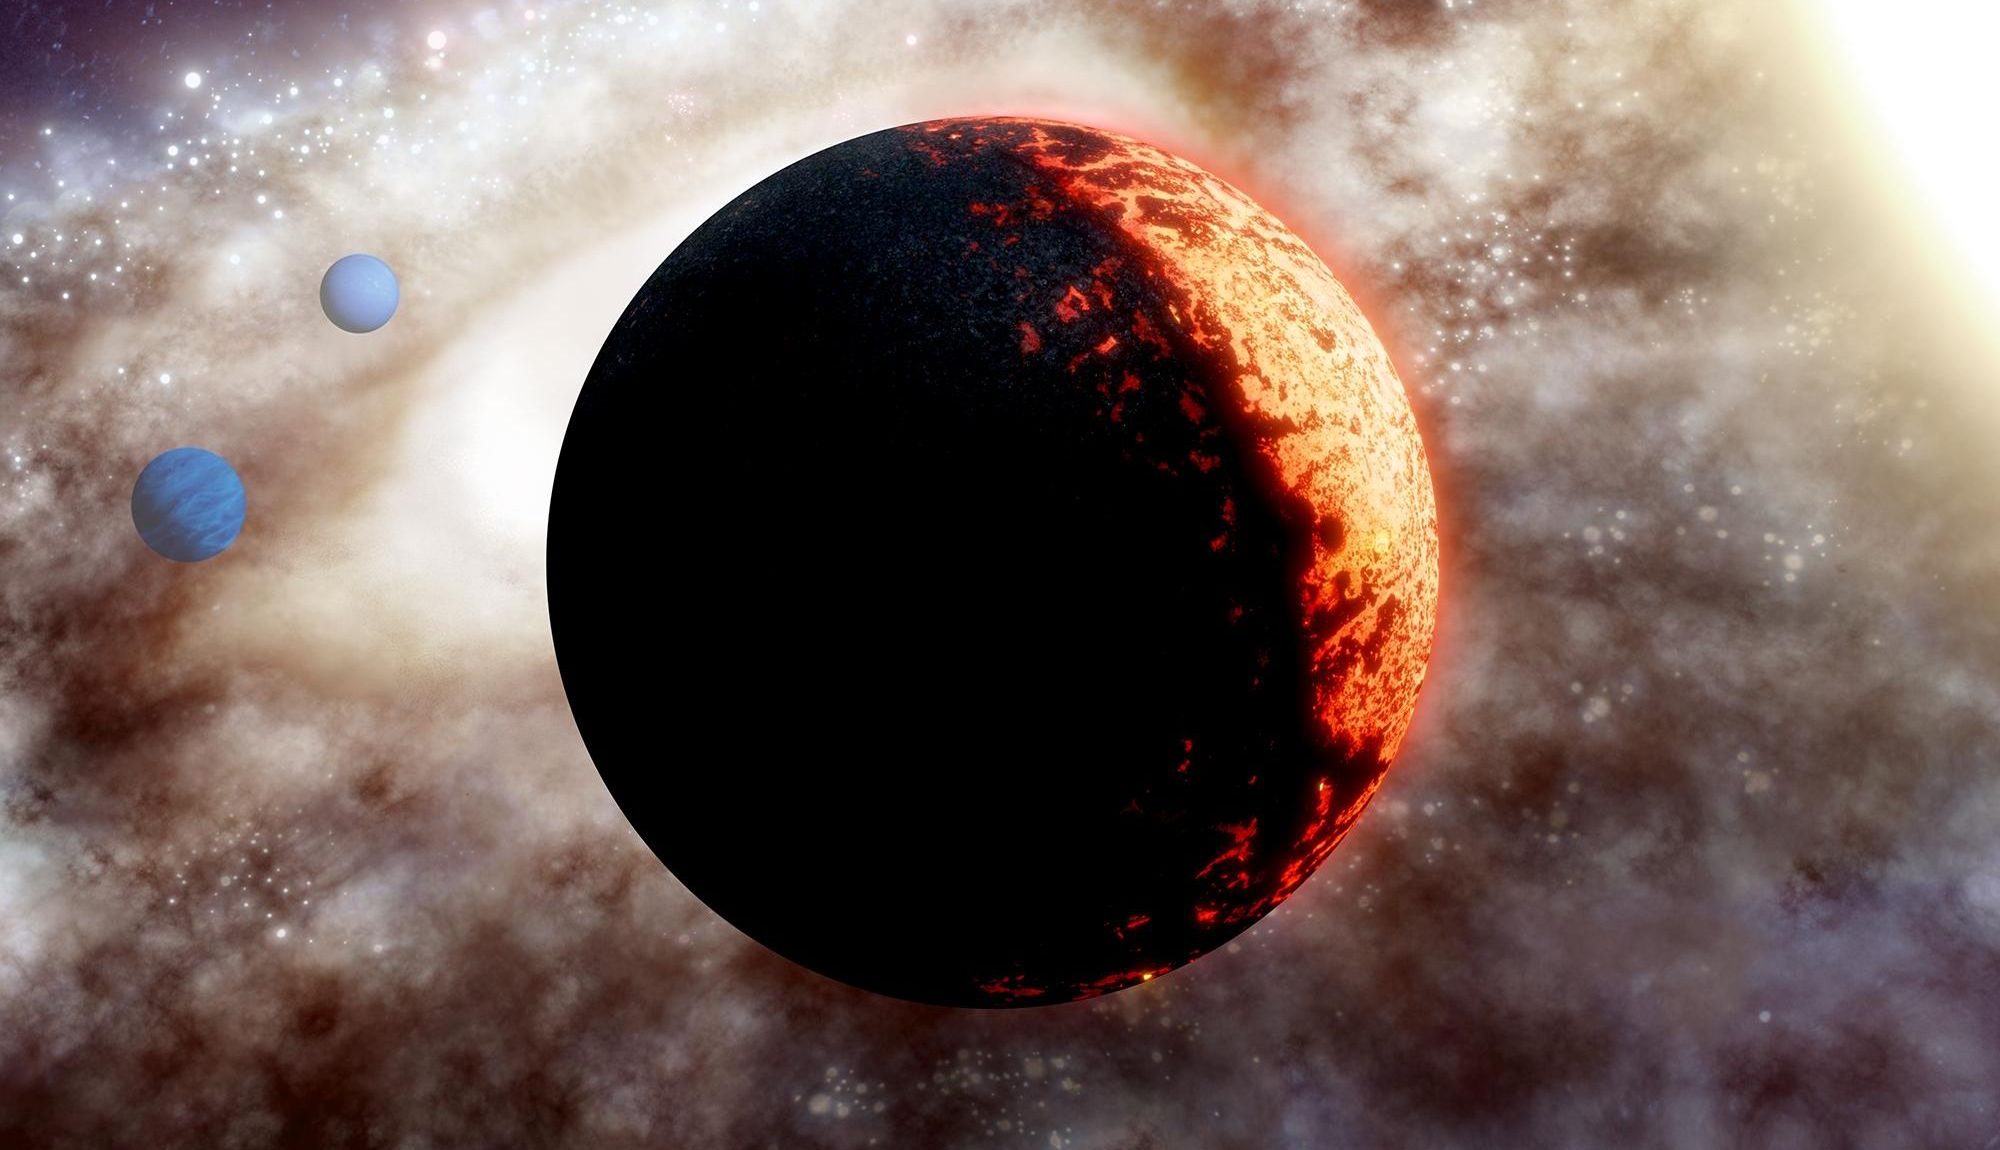 Astronomers have discovered a “super-Earth” that is almost as old as the universe.